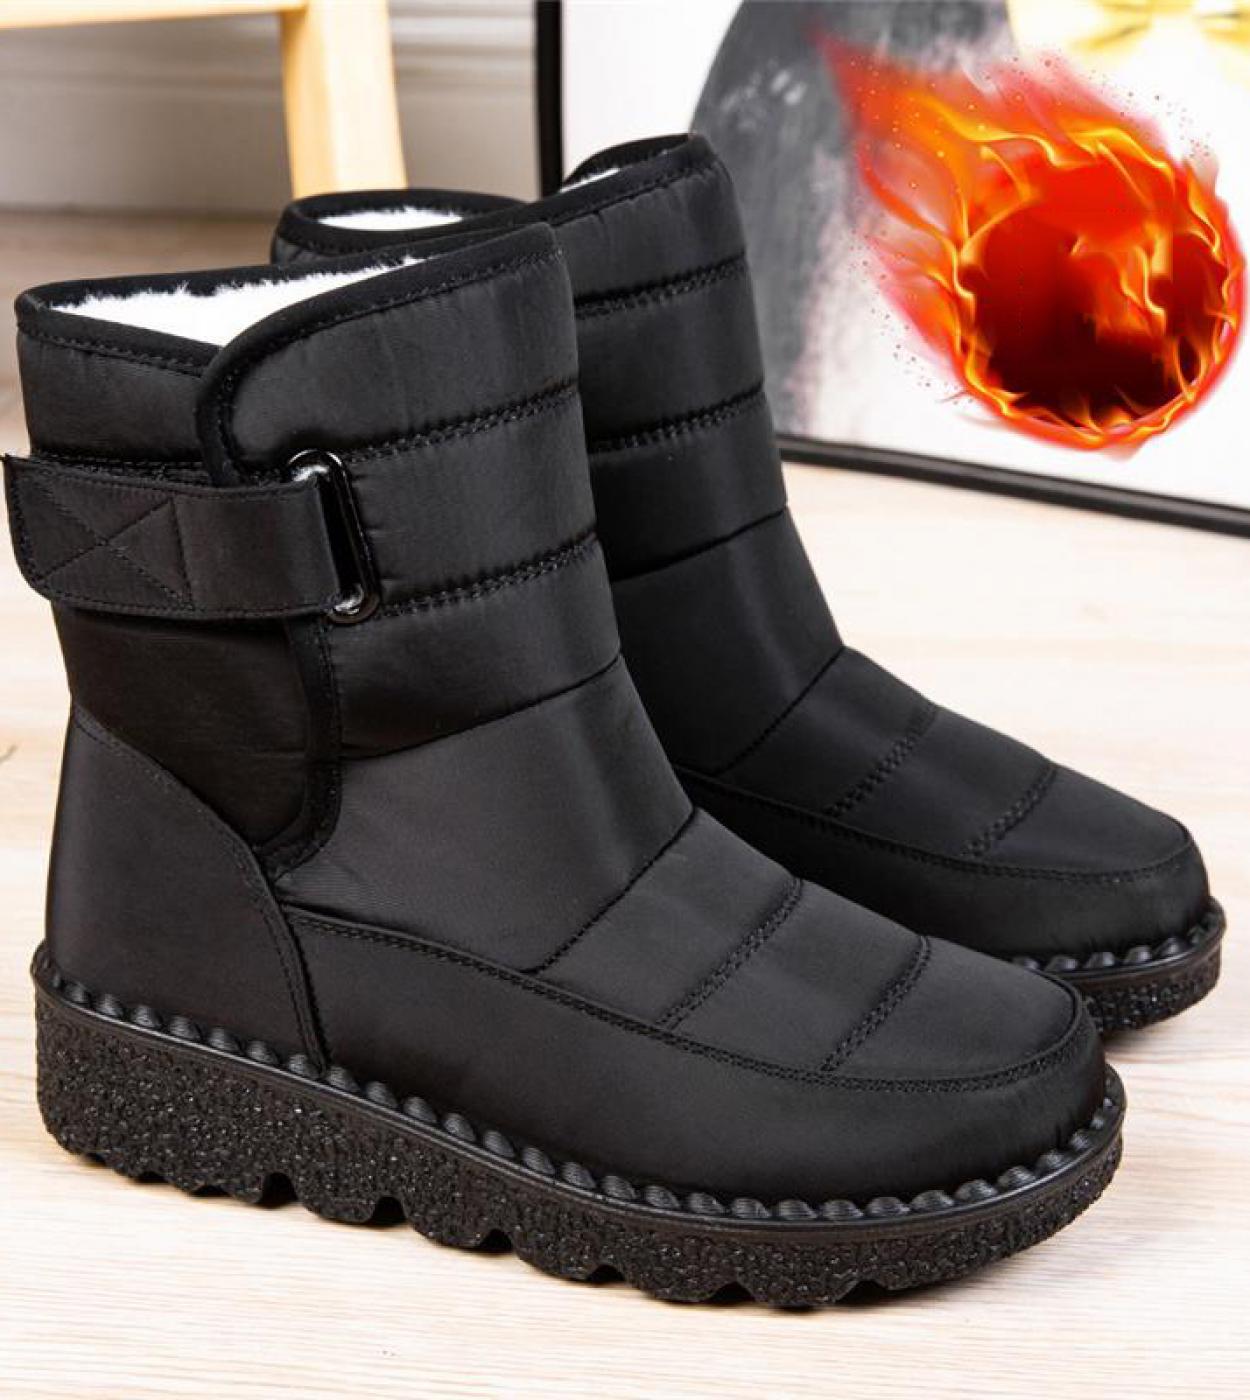 Comemore Womens Winter Snow Boots Waterproof Platform Shoes For Women Warm Ankle Boot Female Cotton Padded Shoe Botas D